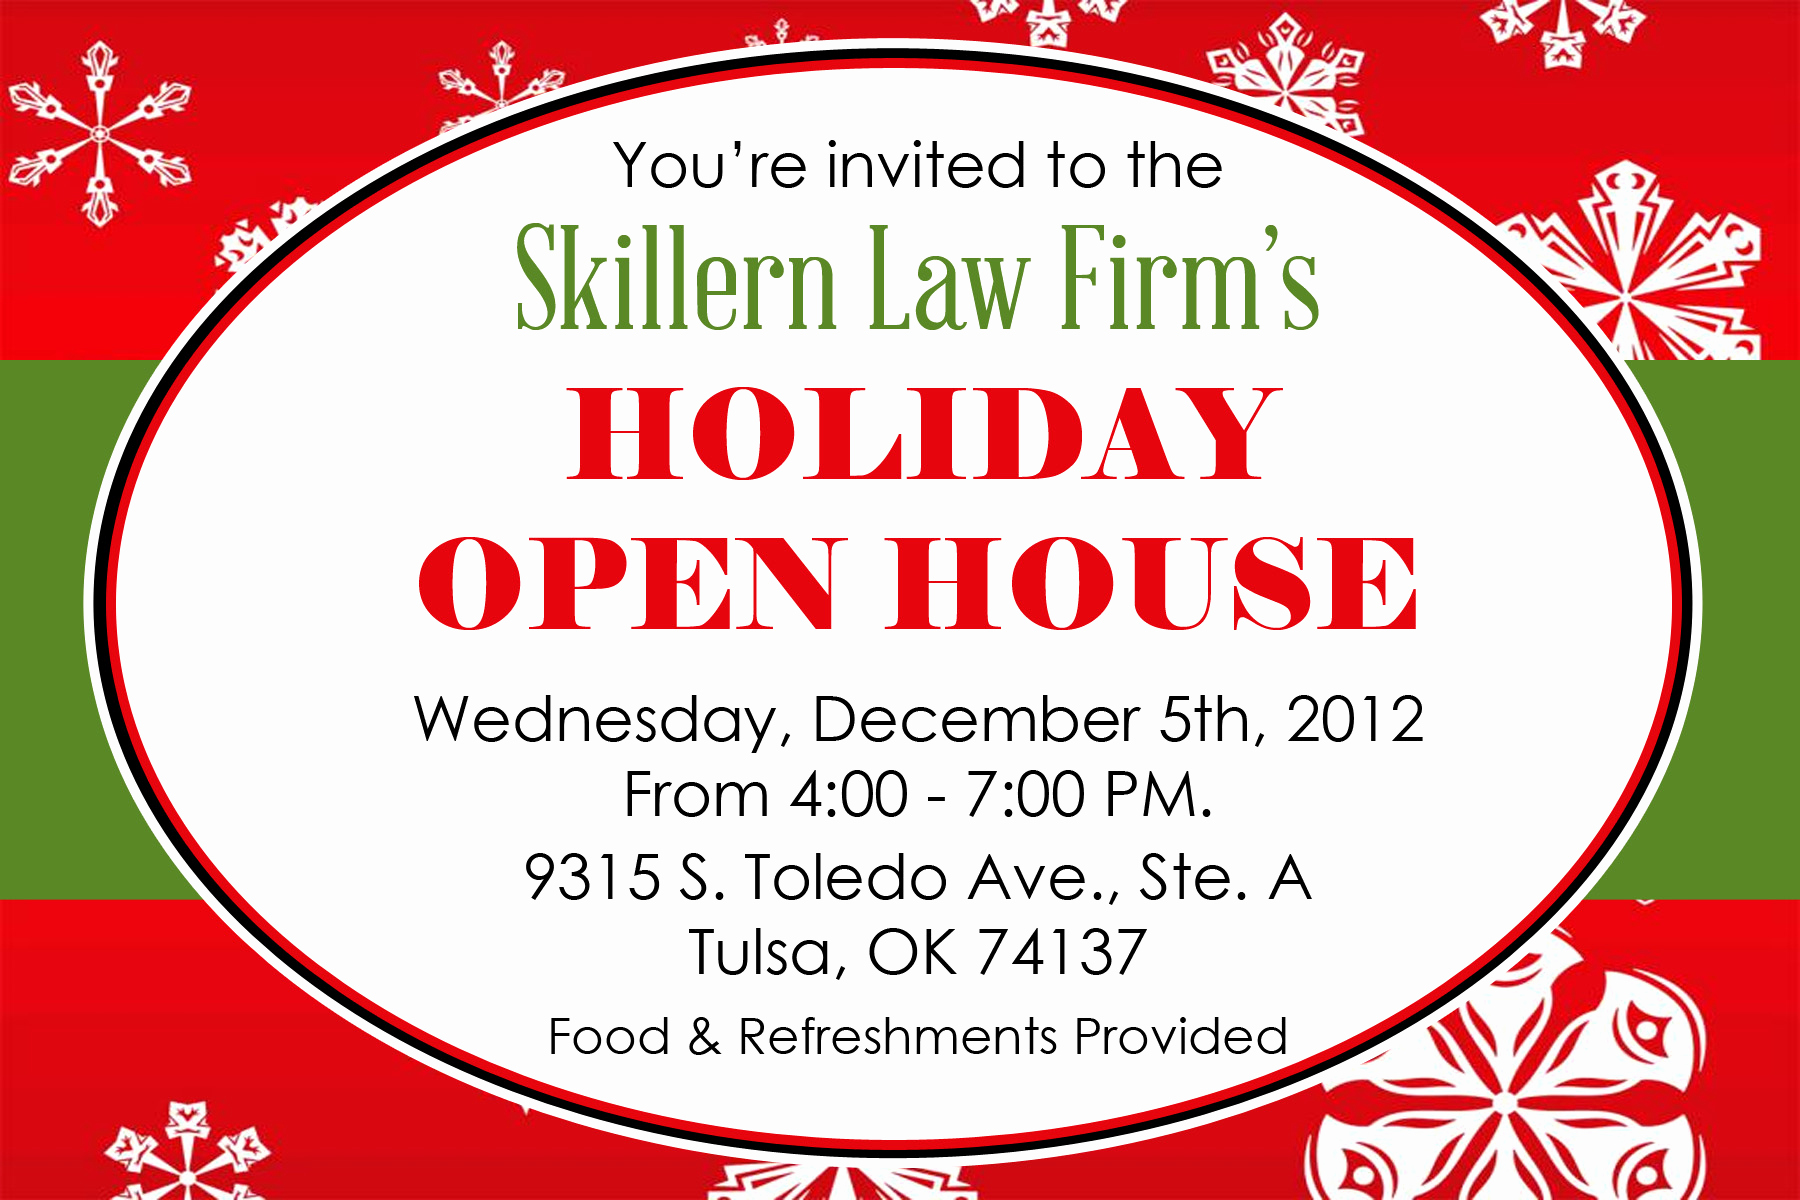 Holiday Open House Invitation Wording Lovely Holiday Open House Skillern Law Firm Pllc